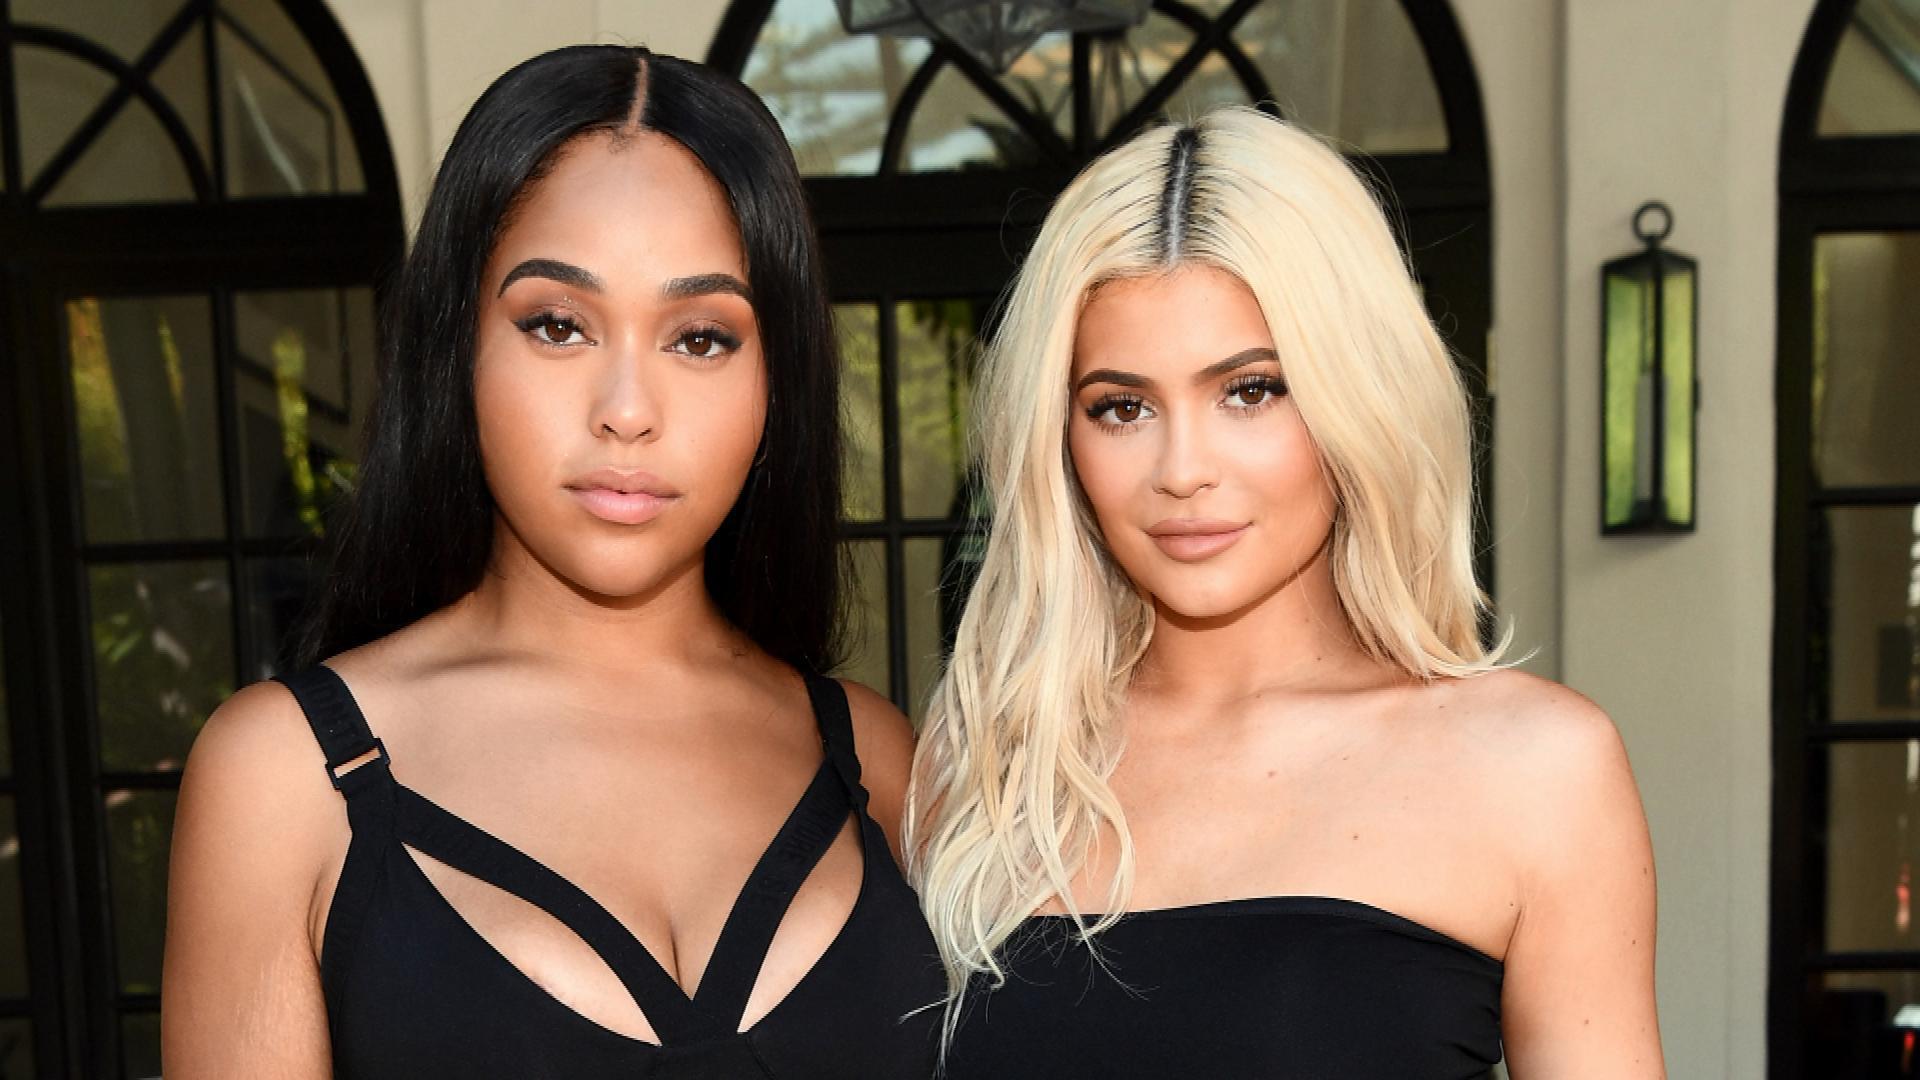 Kylie Jenner Is 'Extremely Upset' With Jordyn Woods Following